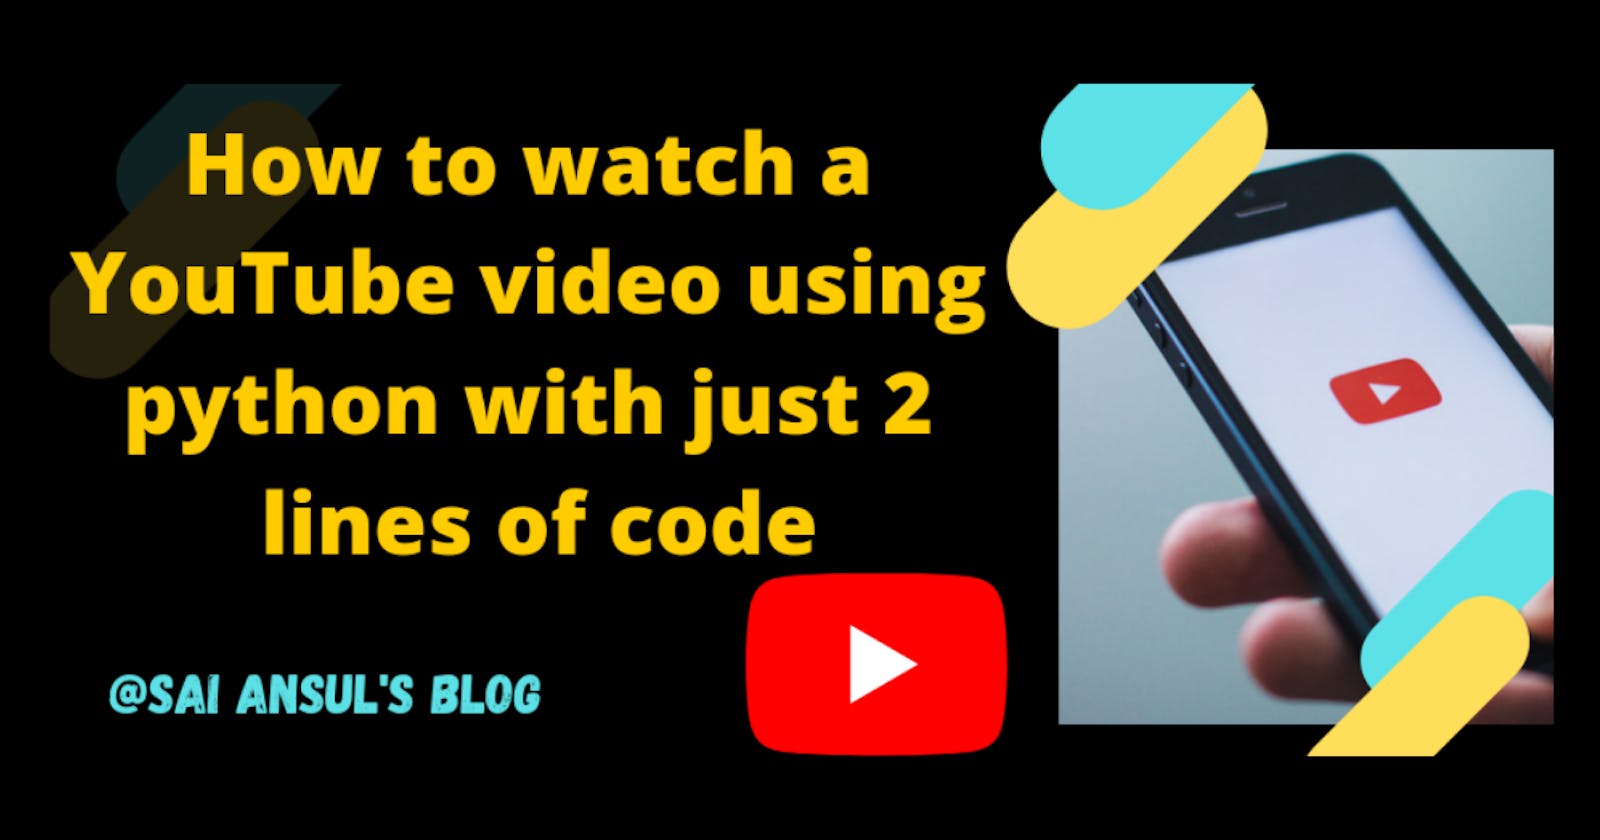 How to watch a YouTube video using python with just  2 lines of code